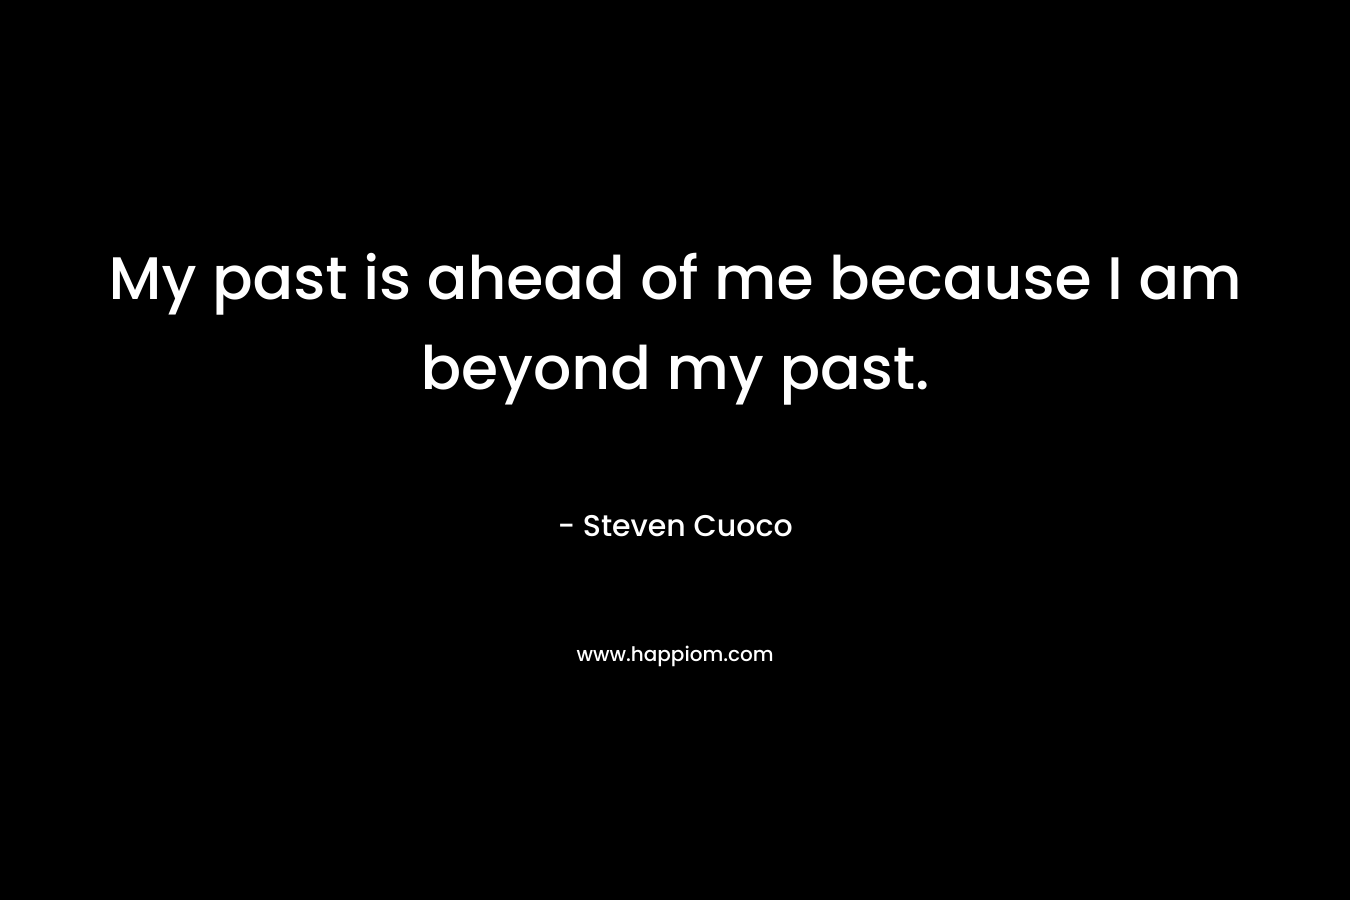 My past is ahead of me because I am beyond my past.